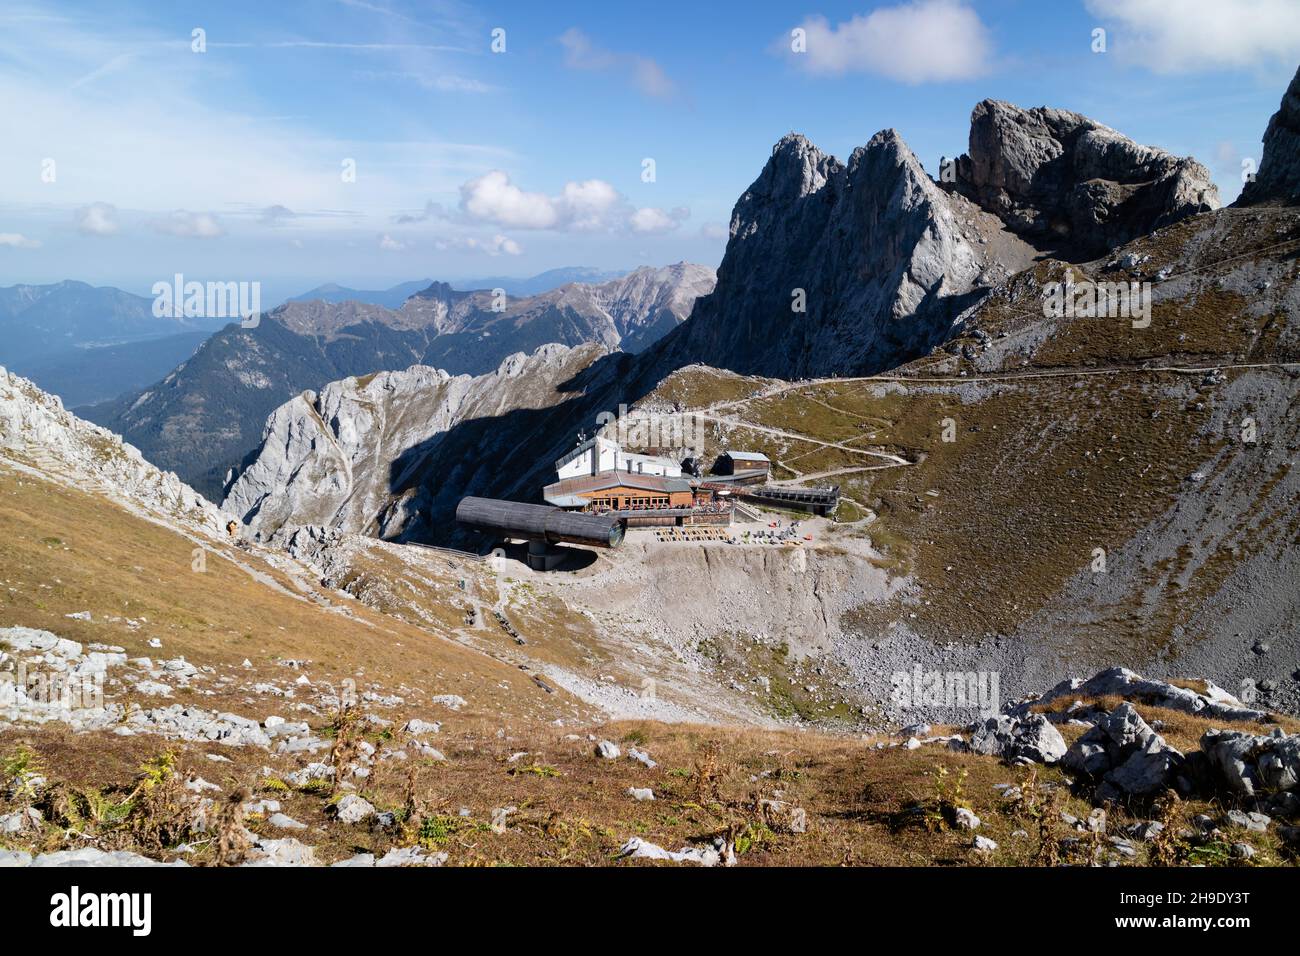 The mountain station an visitor center in the Karwendel in the German Alps Stock Photo